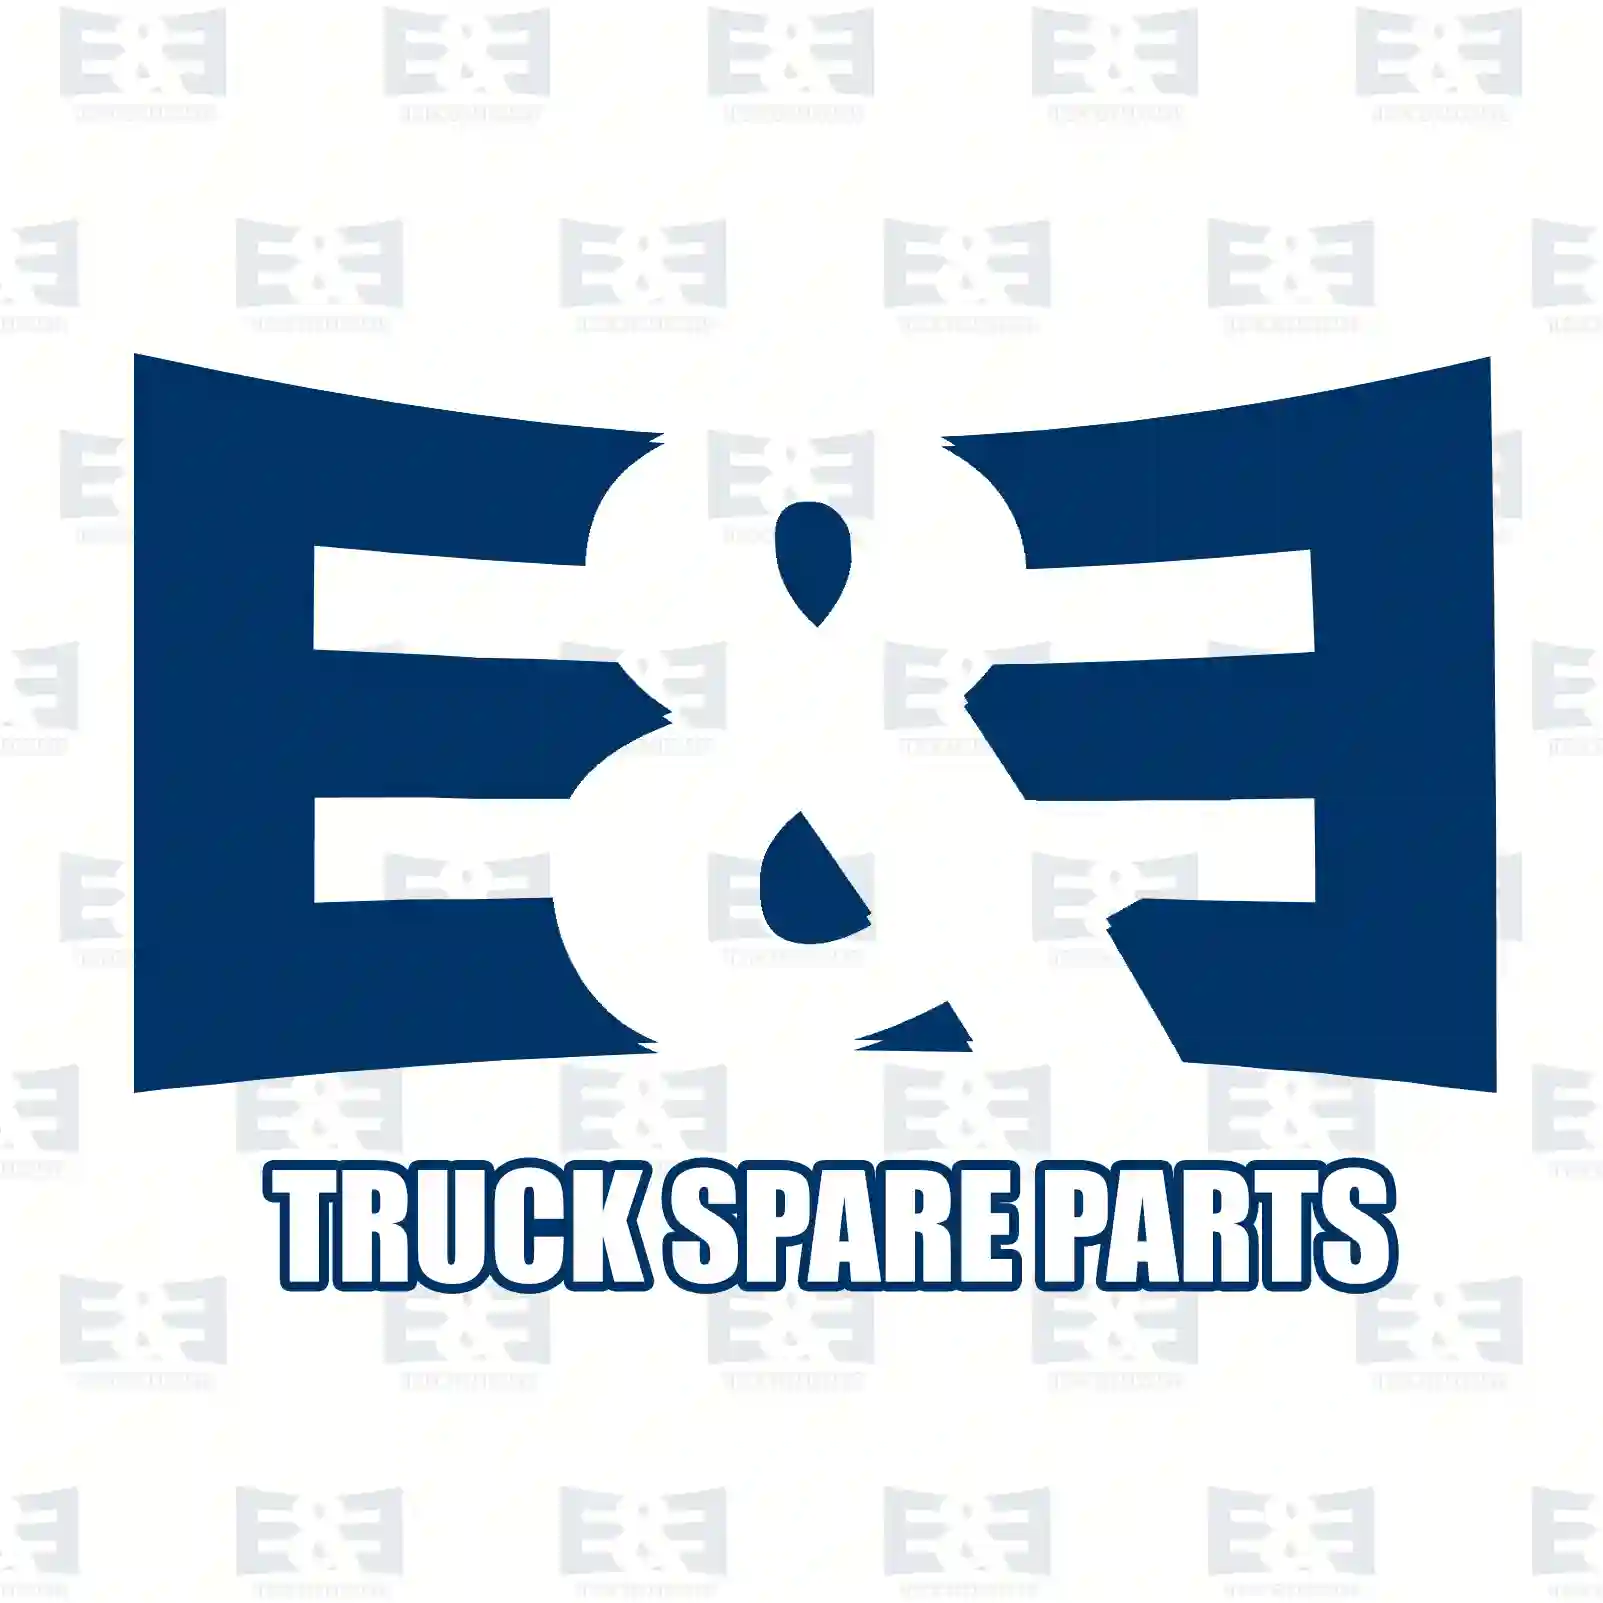  Reading lamp, without bulb || E&E Truck Spare Parts | Truck Spare Parts, Auotomotive Spare Parts